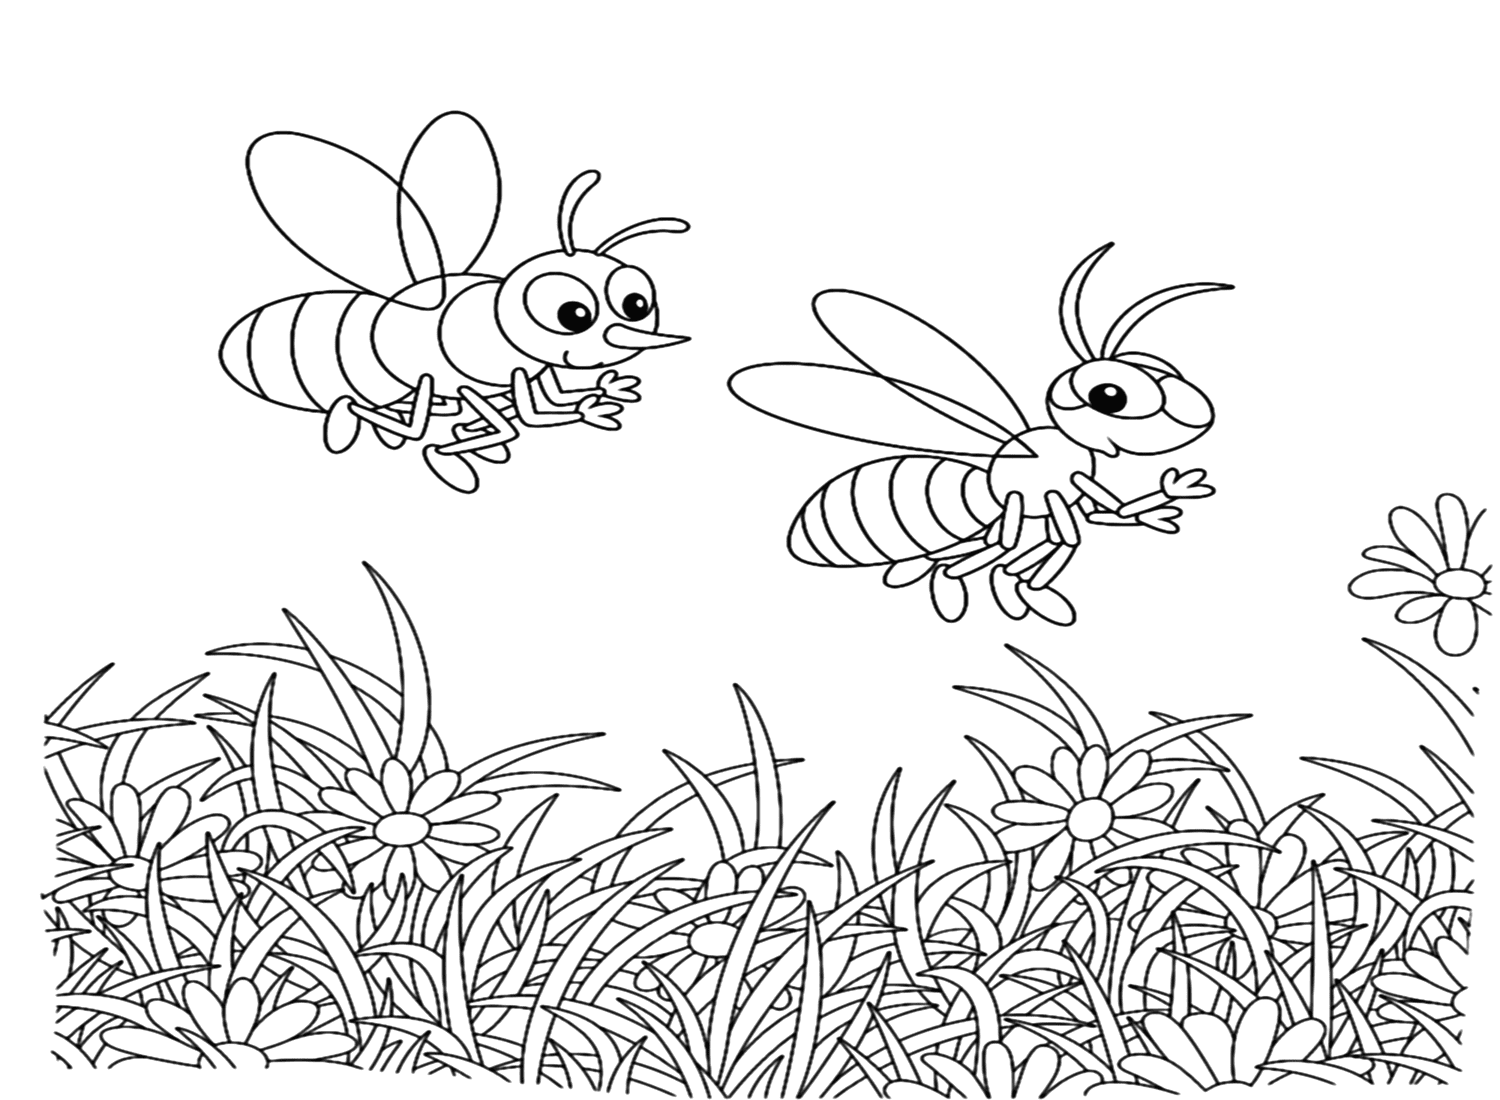 Bee and Wasp Coloring Page from Wasp